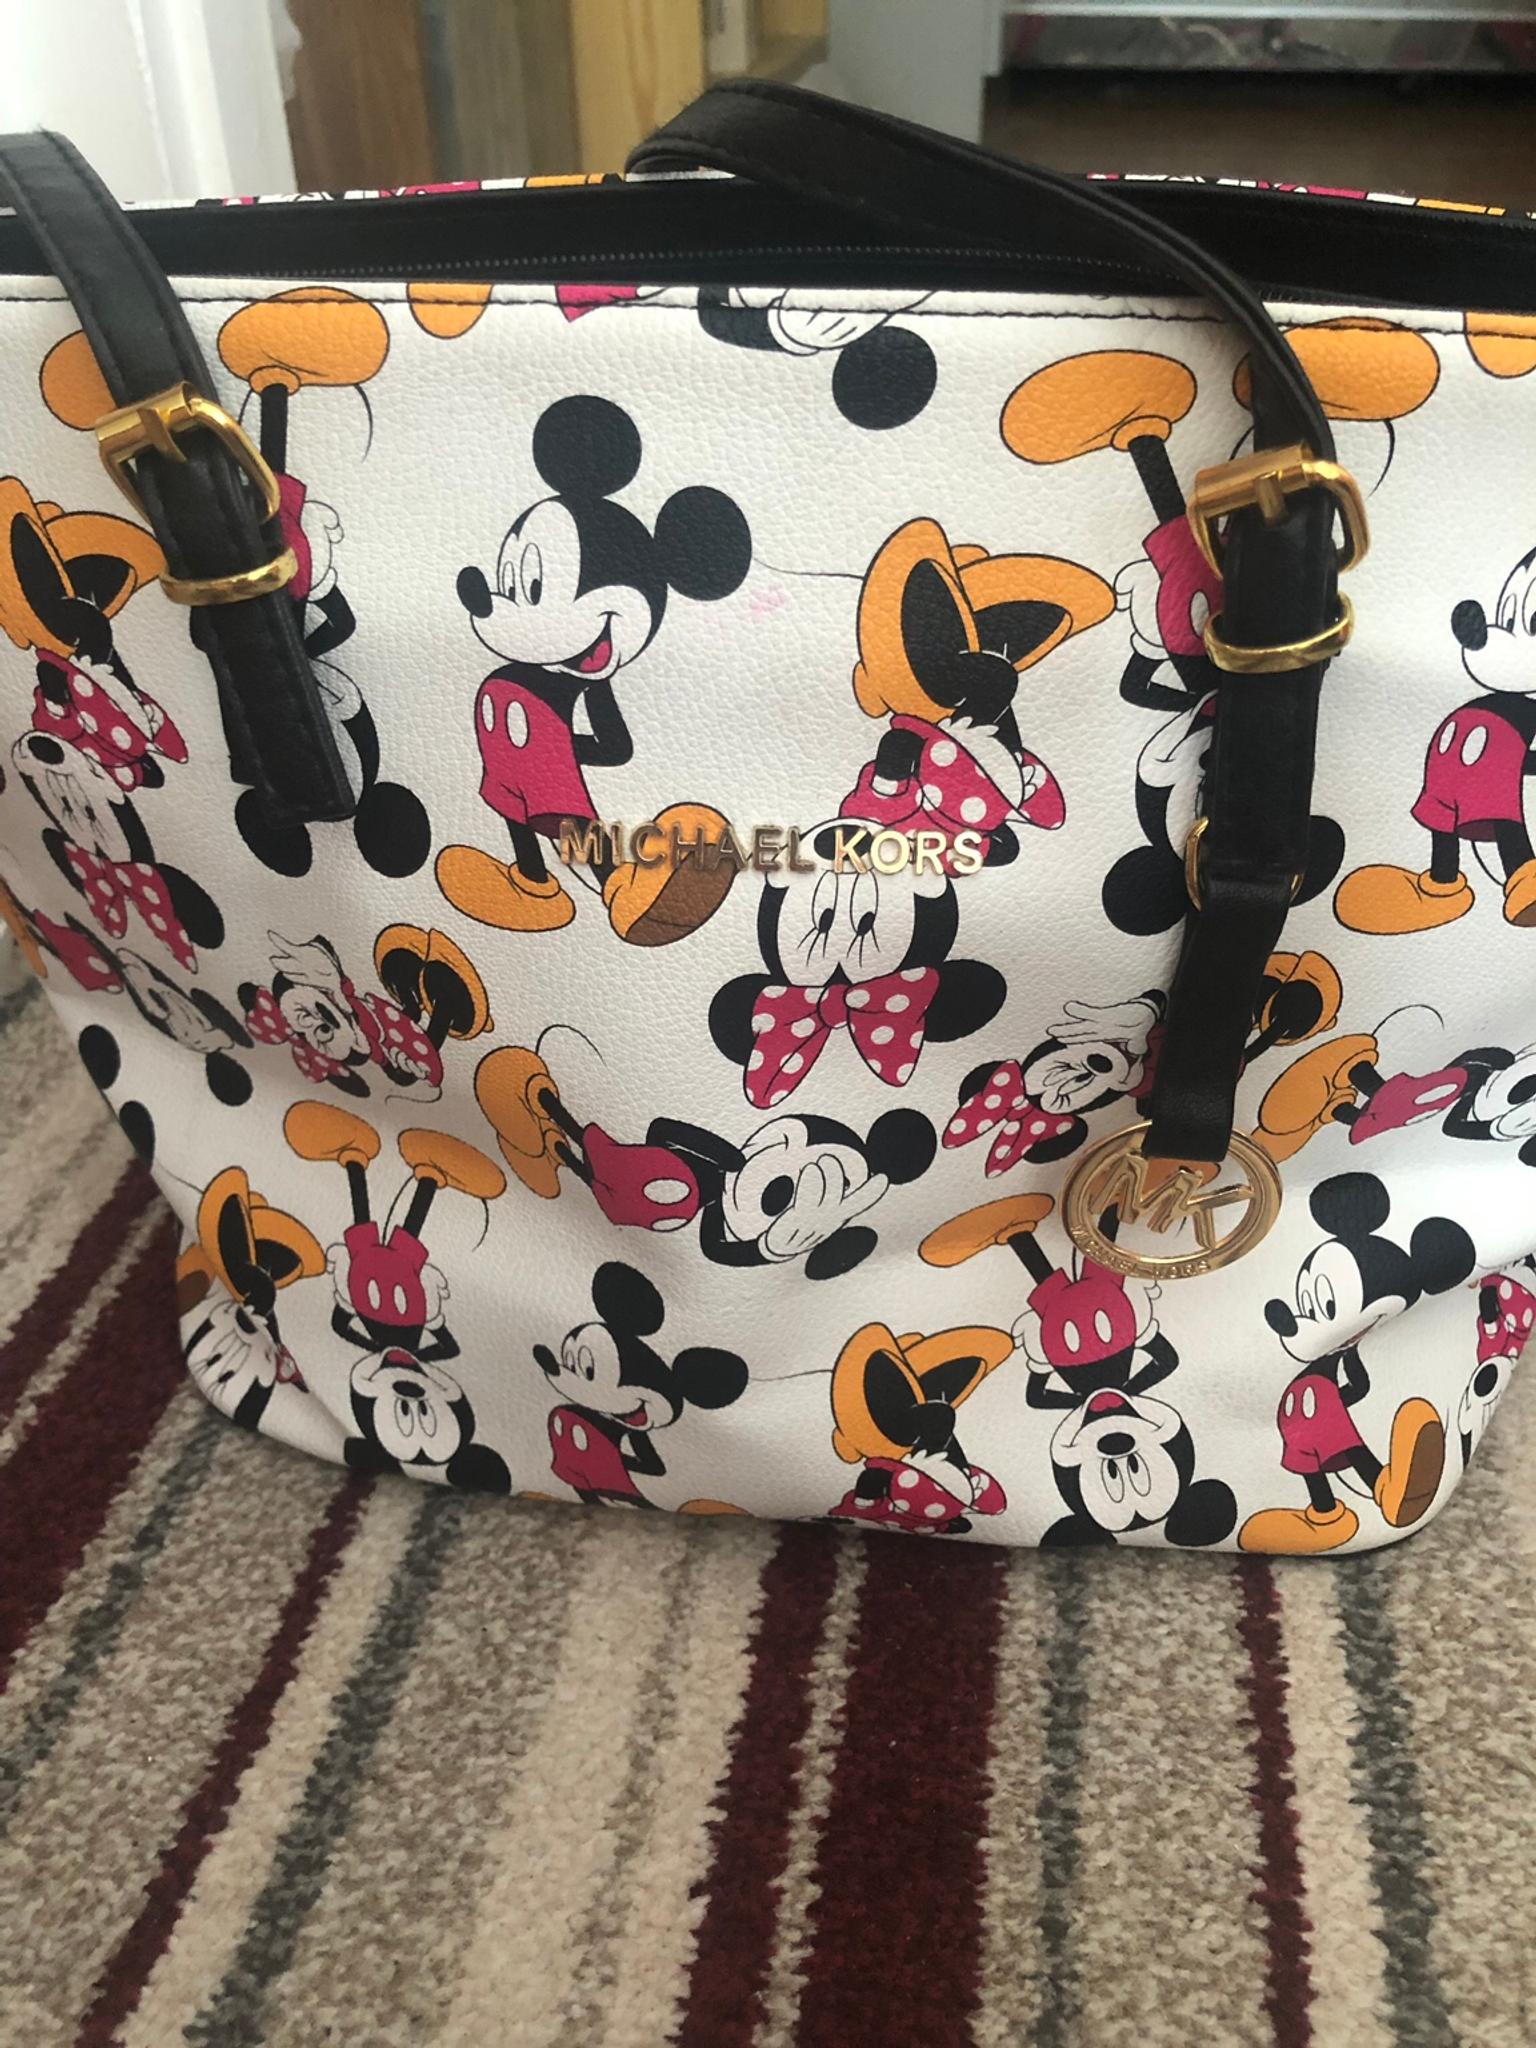 Michael Kors Mickey and Minnie Mouse 